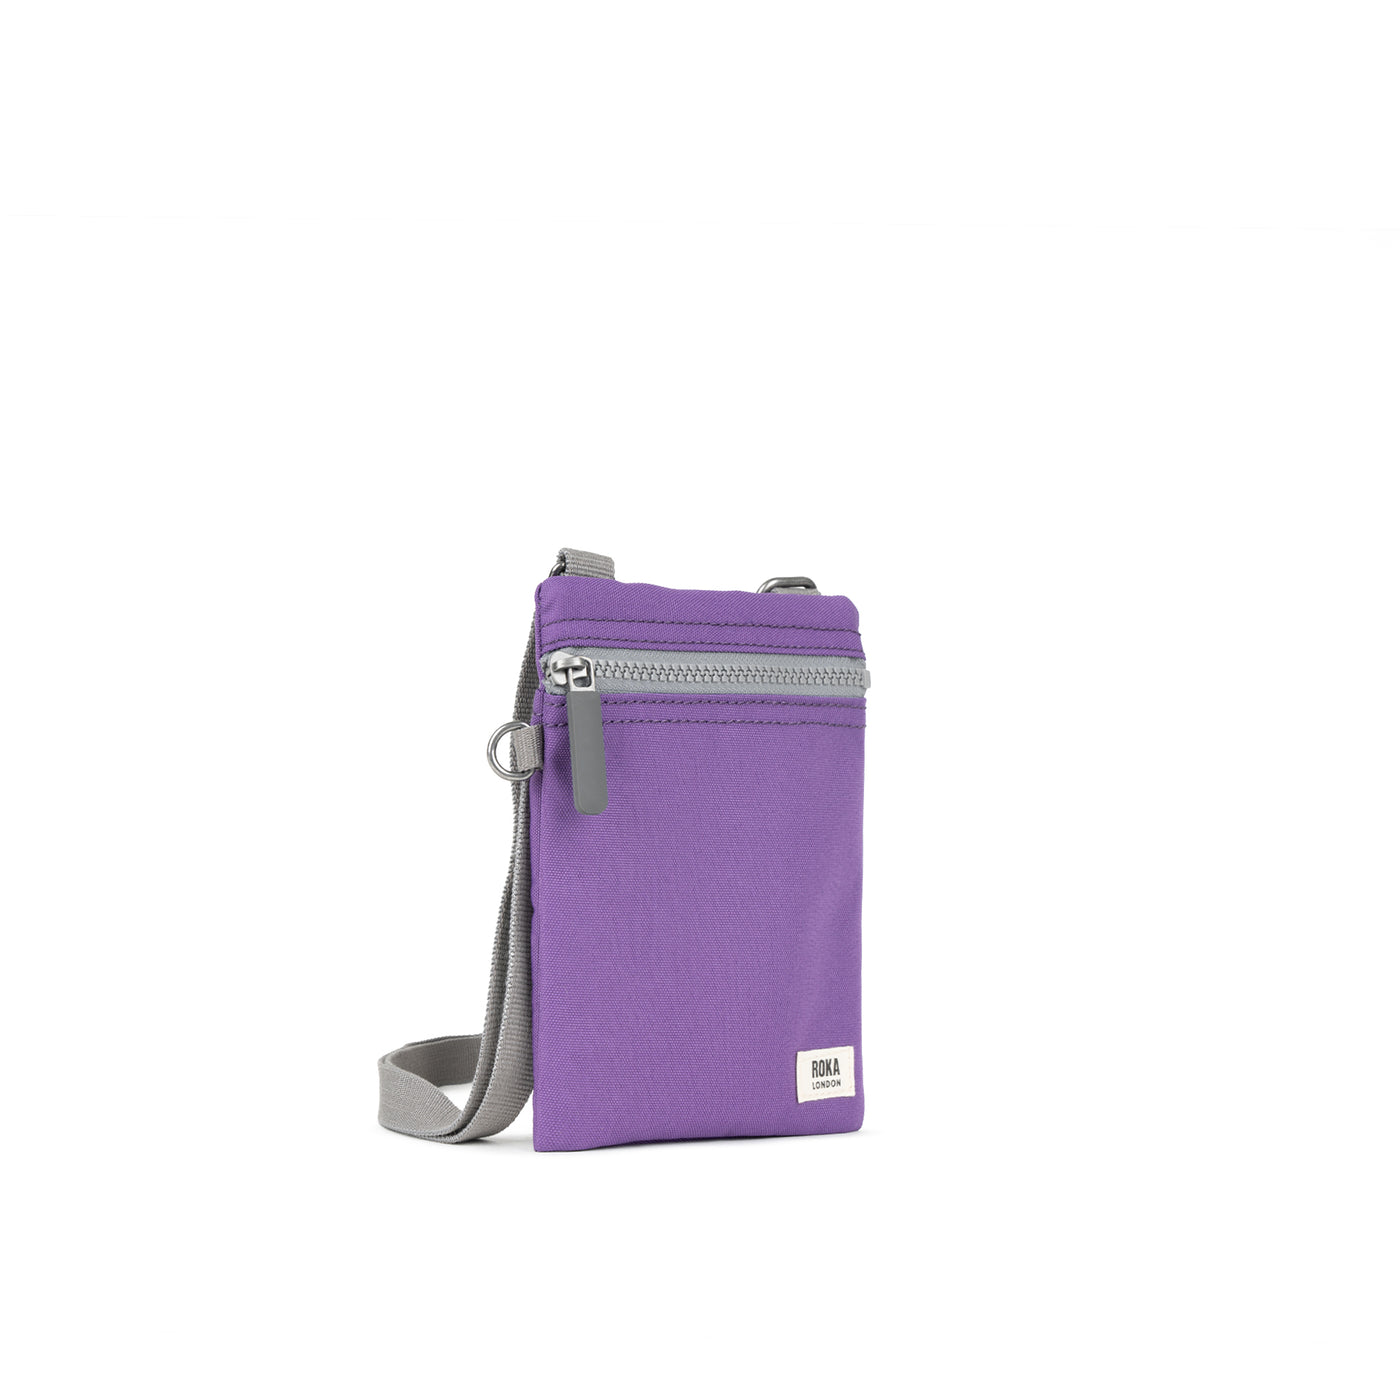 Chelsea Imperial Purple Recycled Canvas